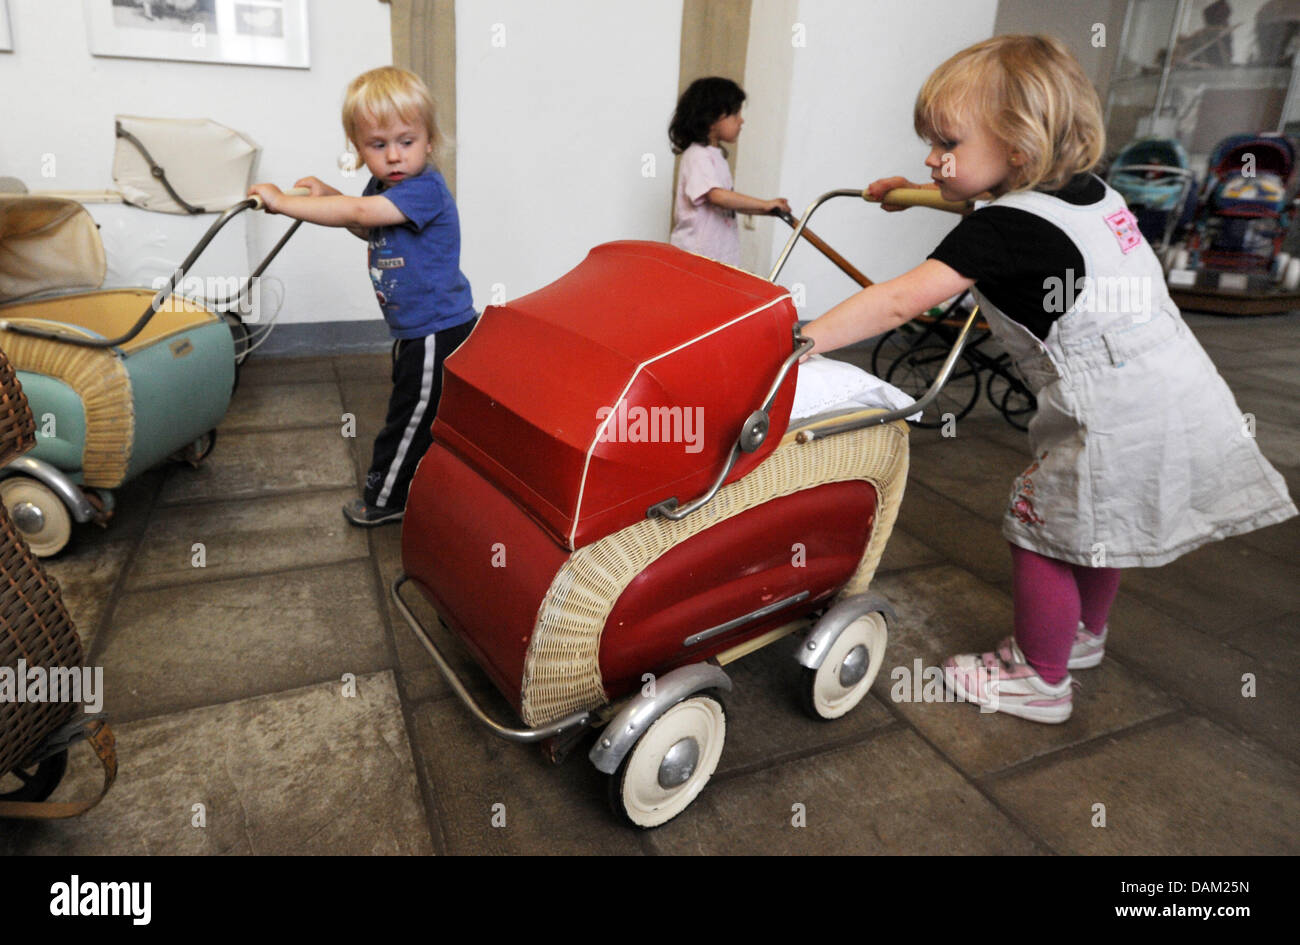 Several two-year-olds from the daycare centre 'Children's dreams' play with doll buggies at the German Stroller Museum in Zeitz, Germany, 11 May 2011. The museum contains around 550 stroller and is the largest of its klind in Germany. Strollers from 1860 till now can be seen. Photo: Waltraud Grubitzsch Stock Photo